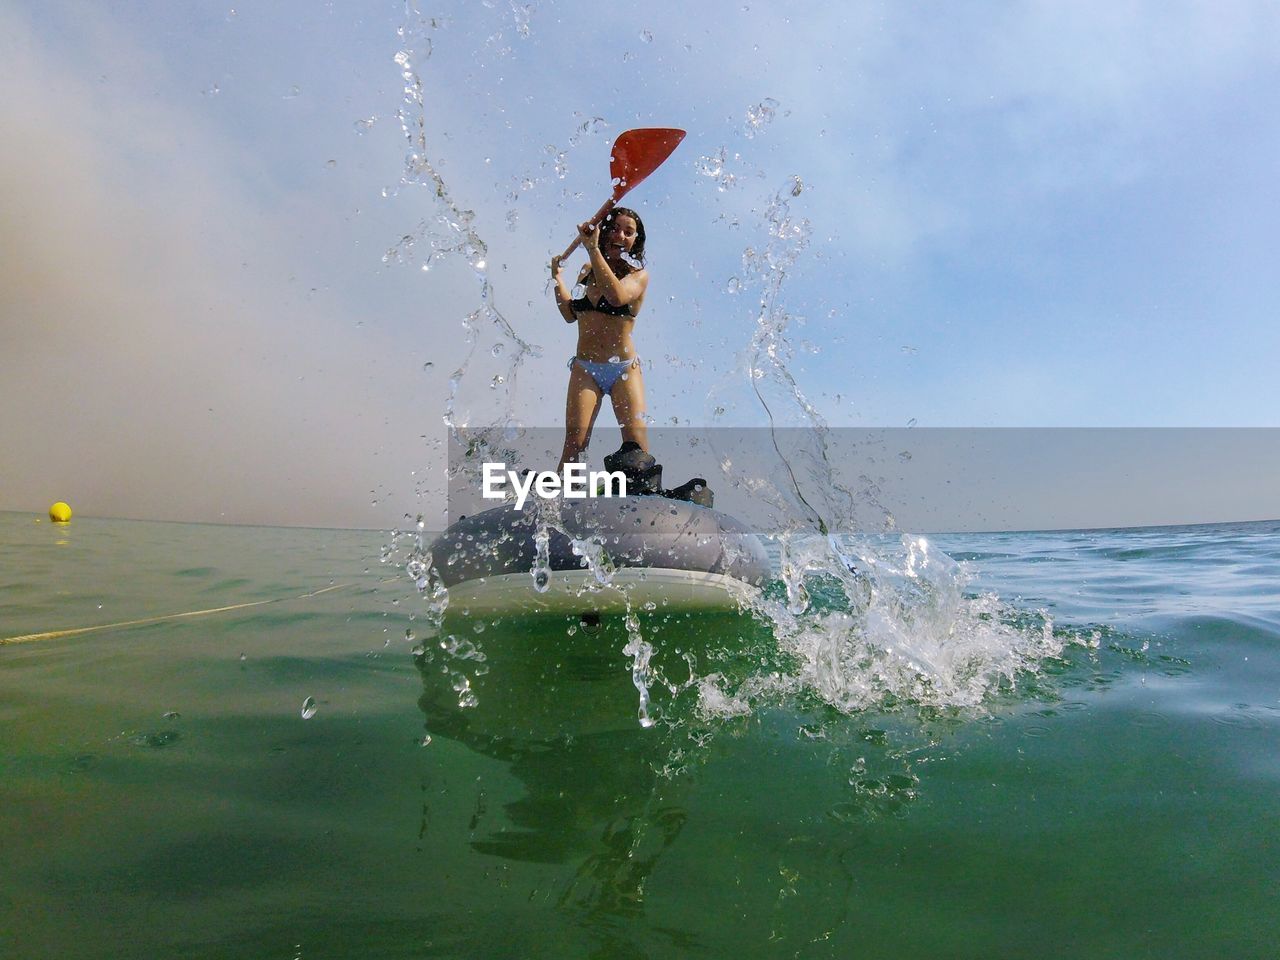 Cheerful young woman standing on inflatable raft in sea against sky